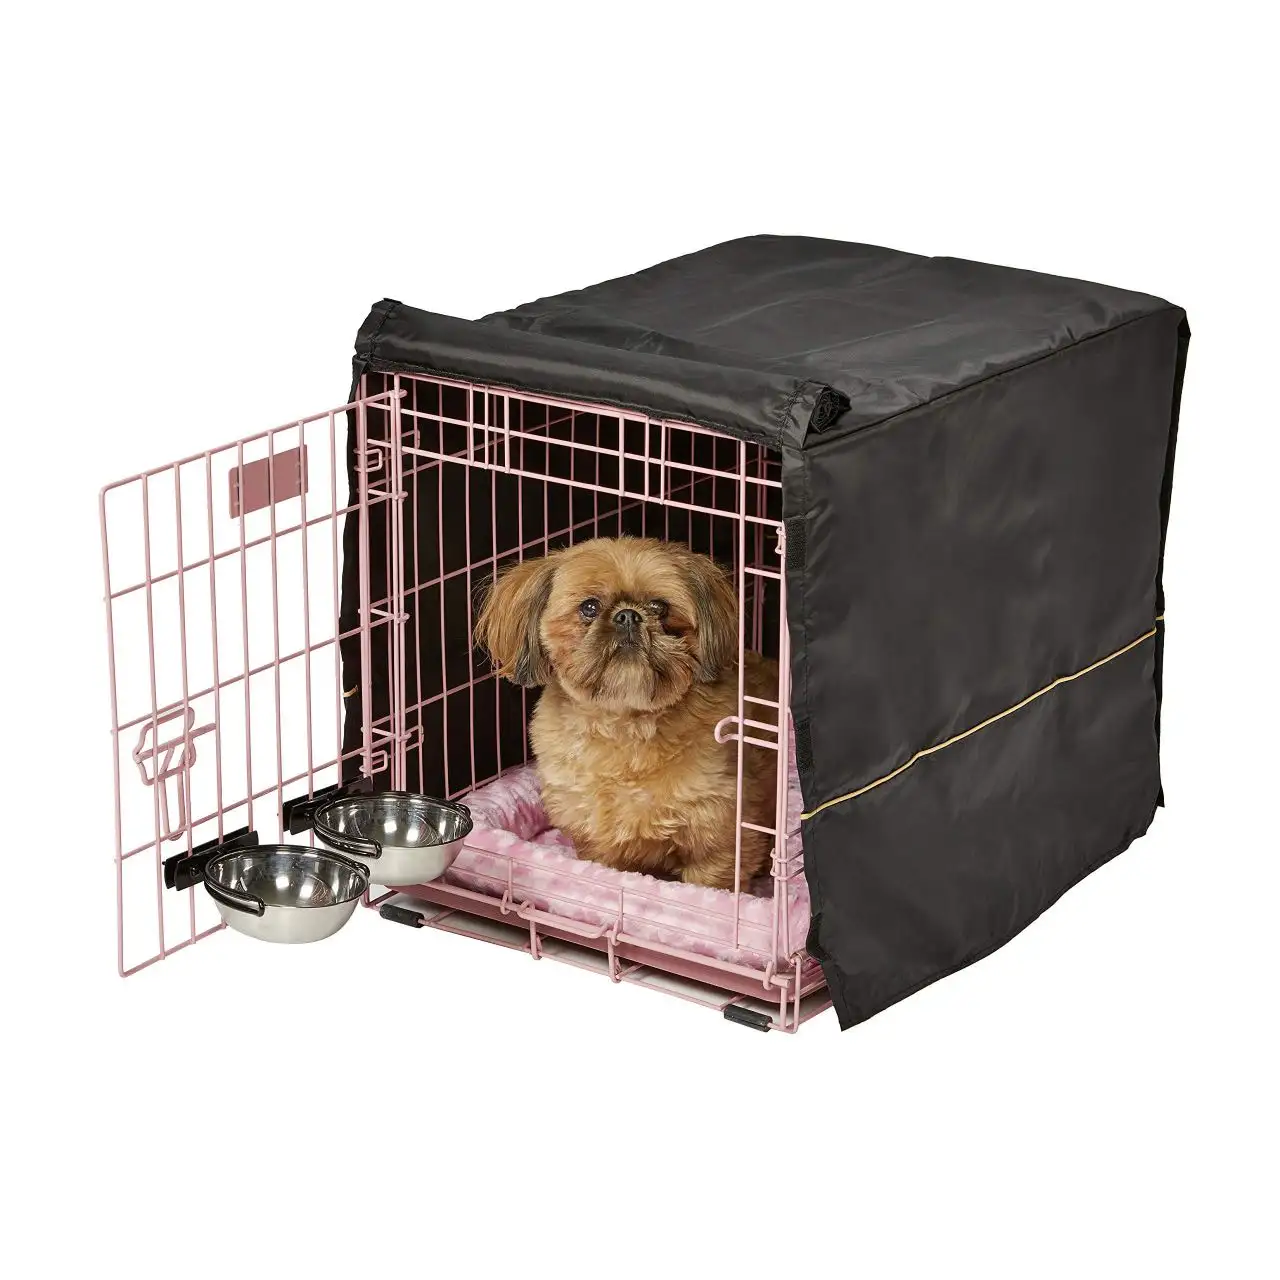 Most Popular Plush 24*18*19inch High Anxiety Dog Crate Pink Metal Dog Crate Pad with Cushion Cover